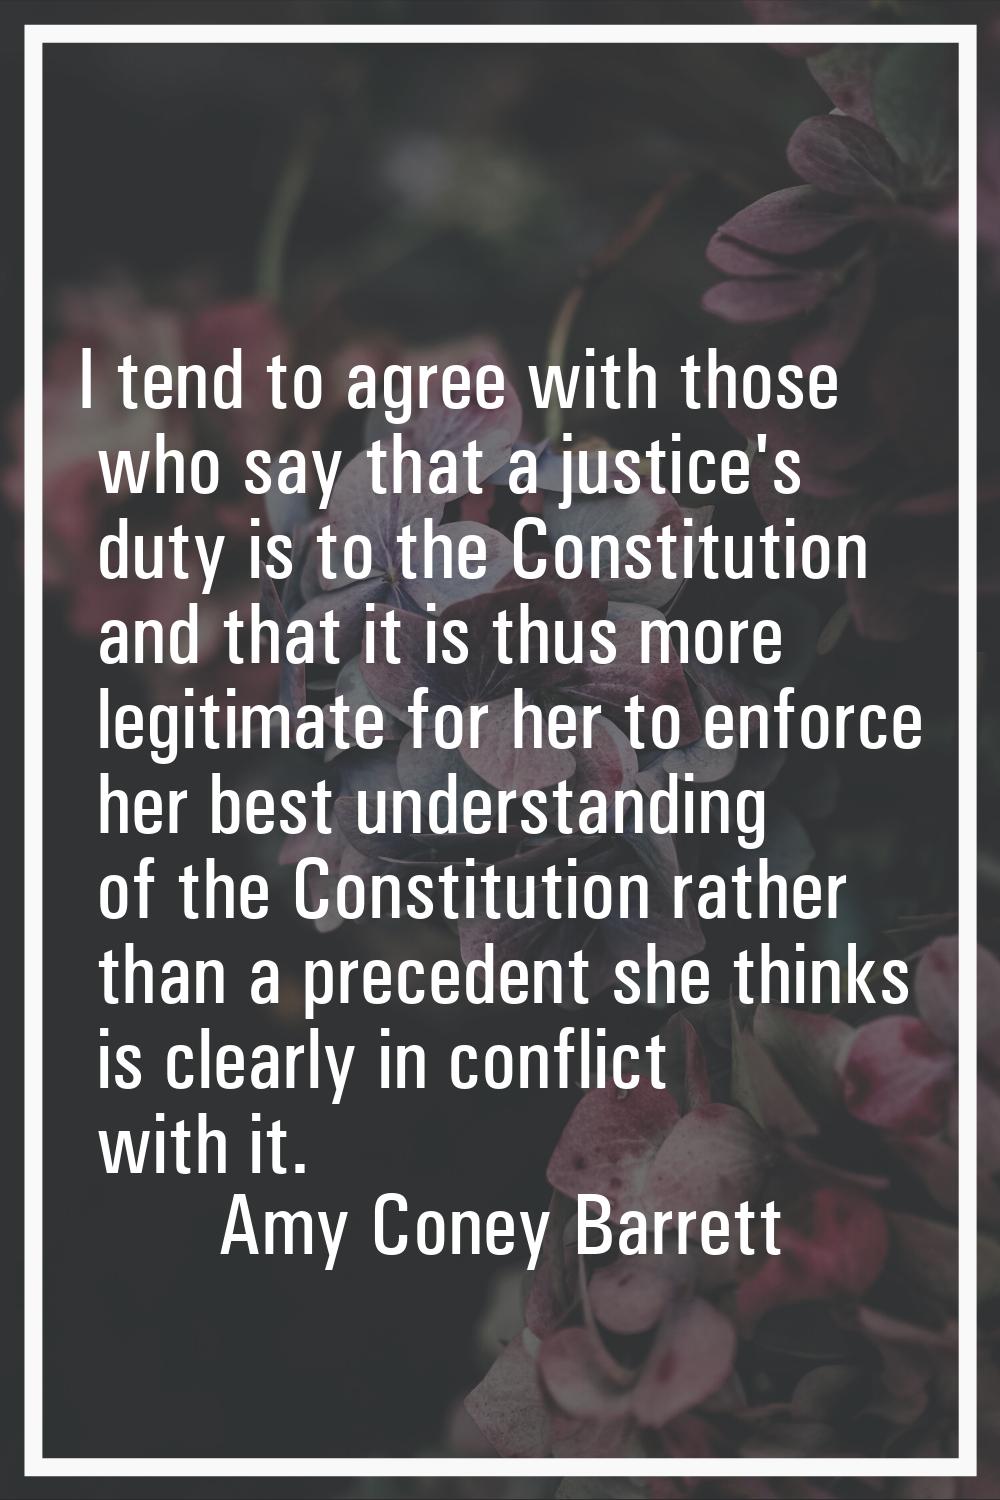 I tend to agree with those who say that a justice's duty is to the Constitution and that it is thus